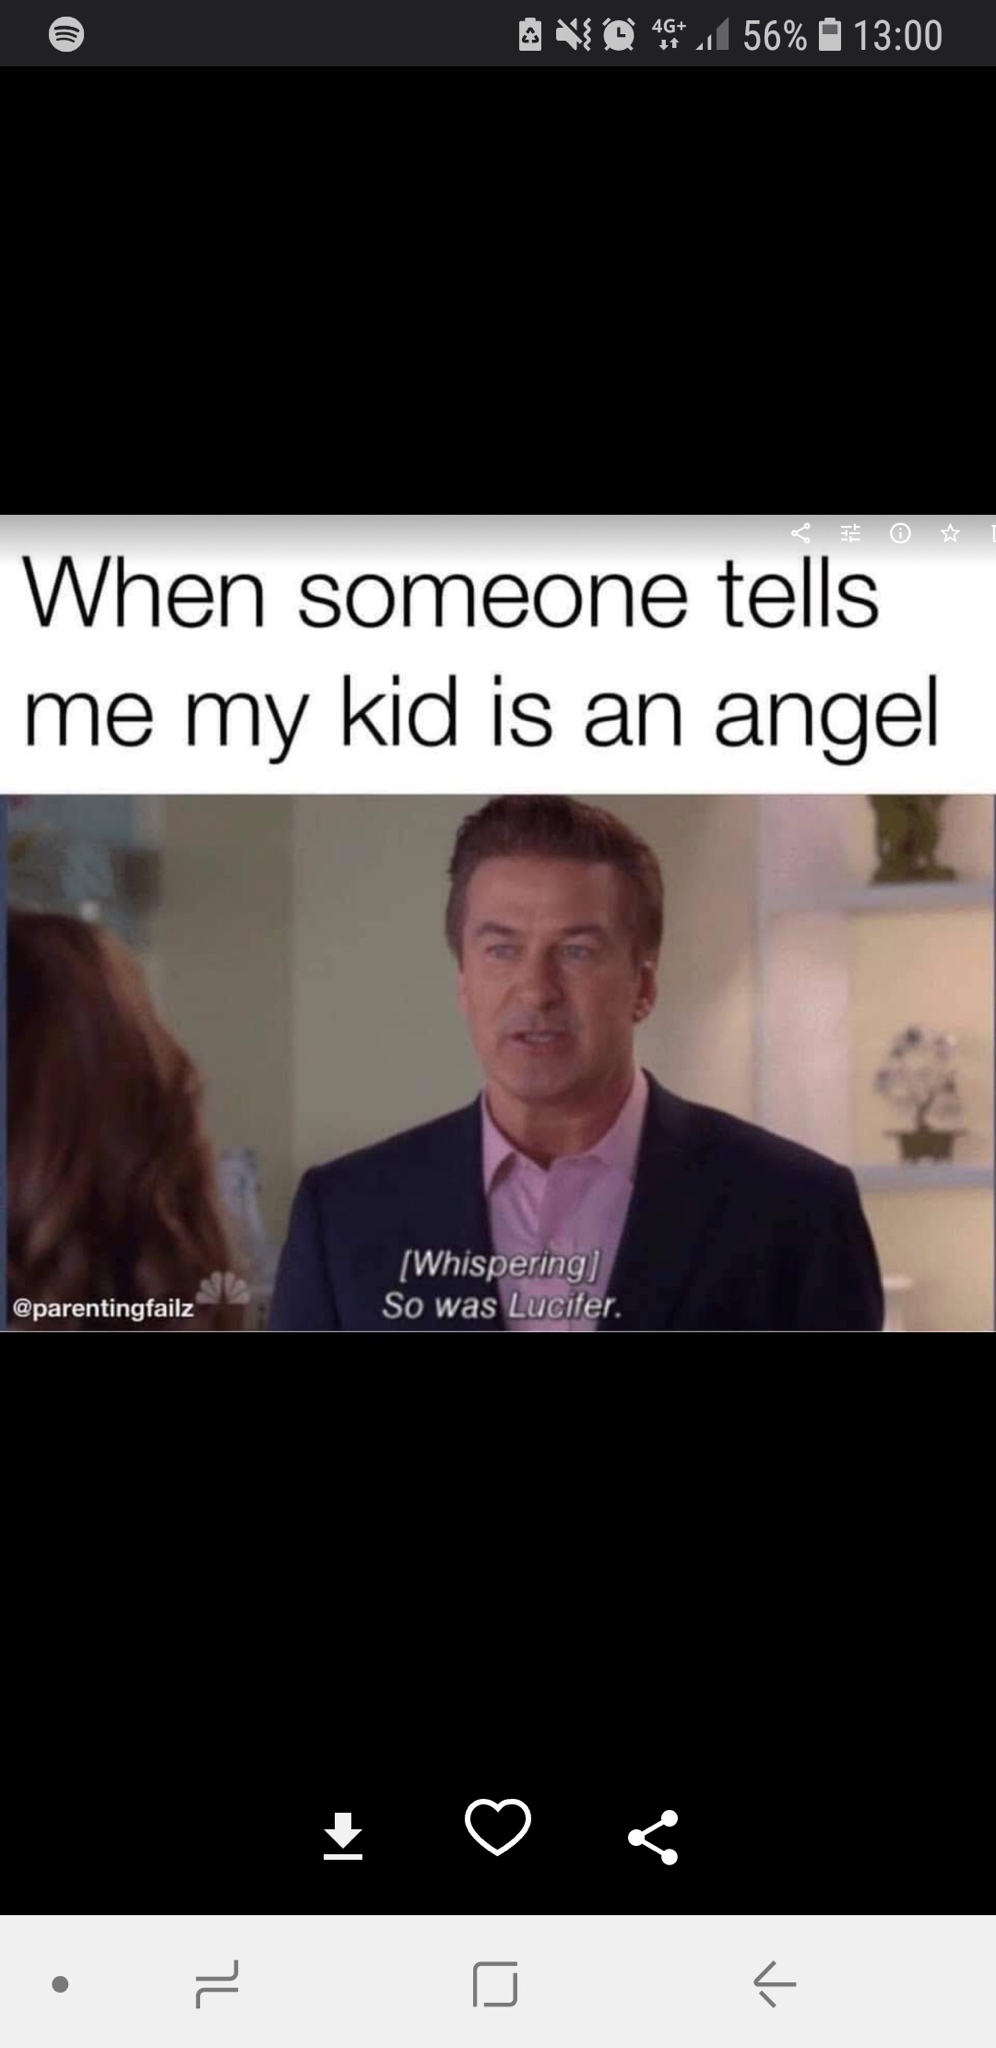 someone tells me my kid - A Nid 4G 1 56% When someone tells me my kid is an angel Whispering So was Lucifer.